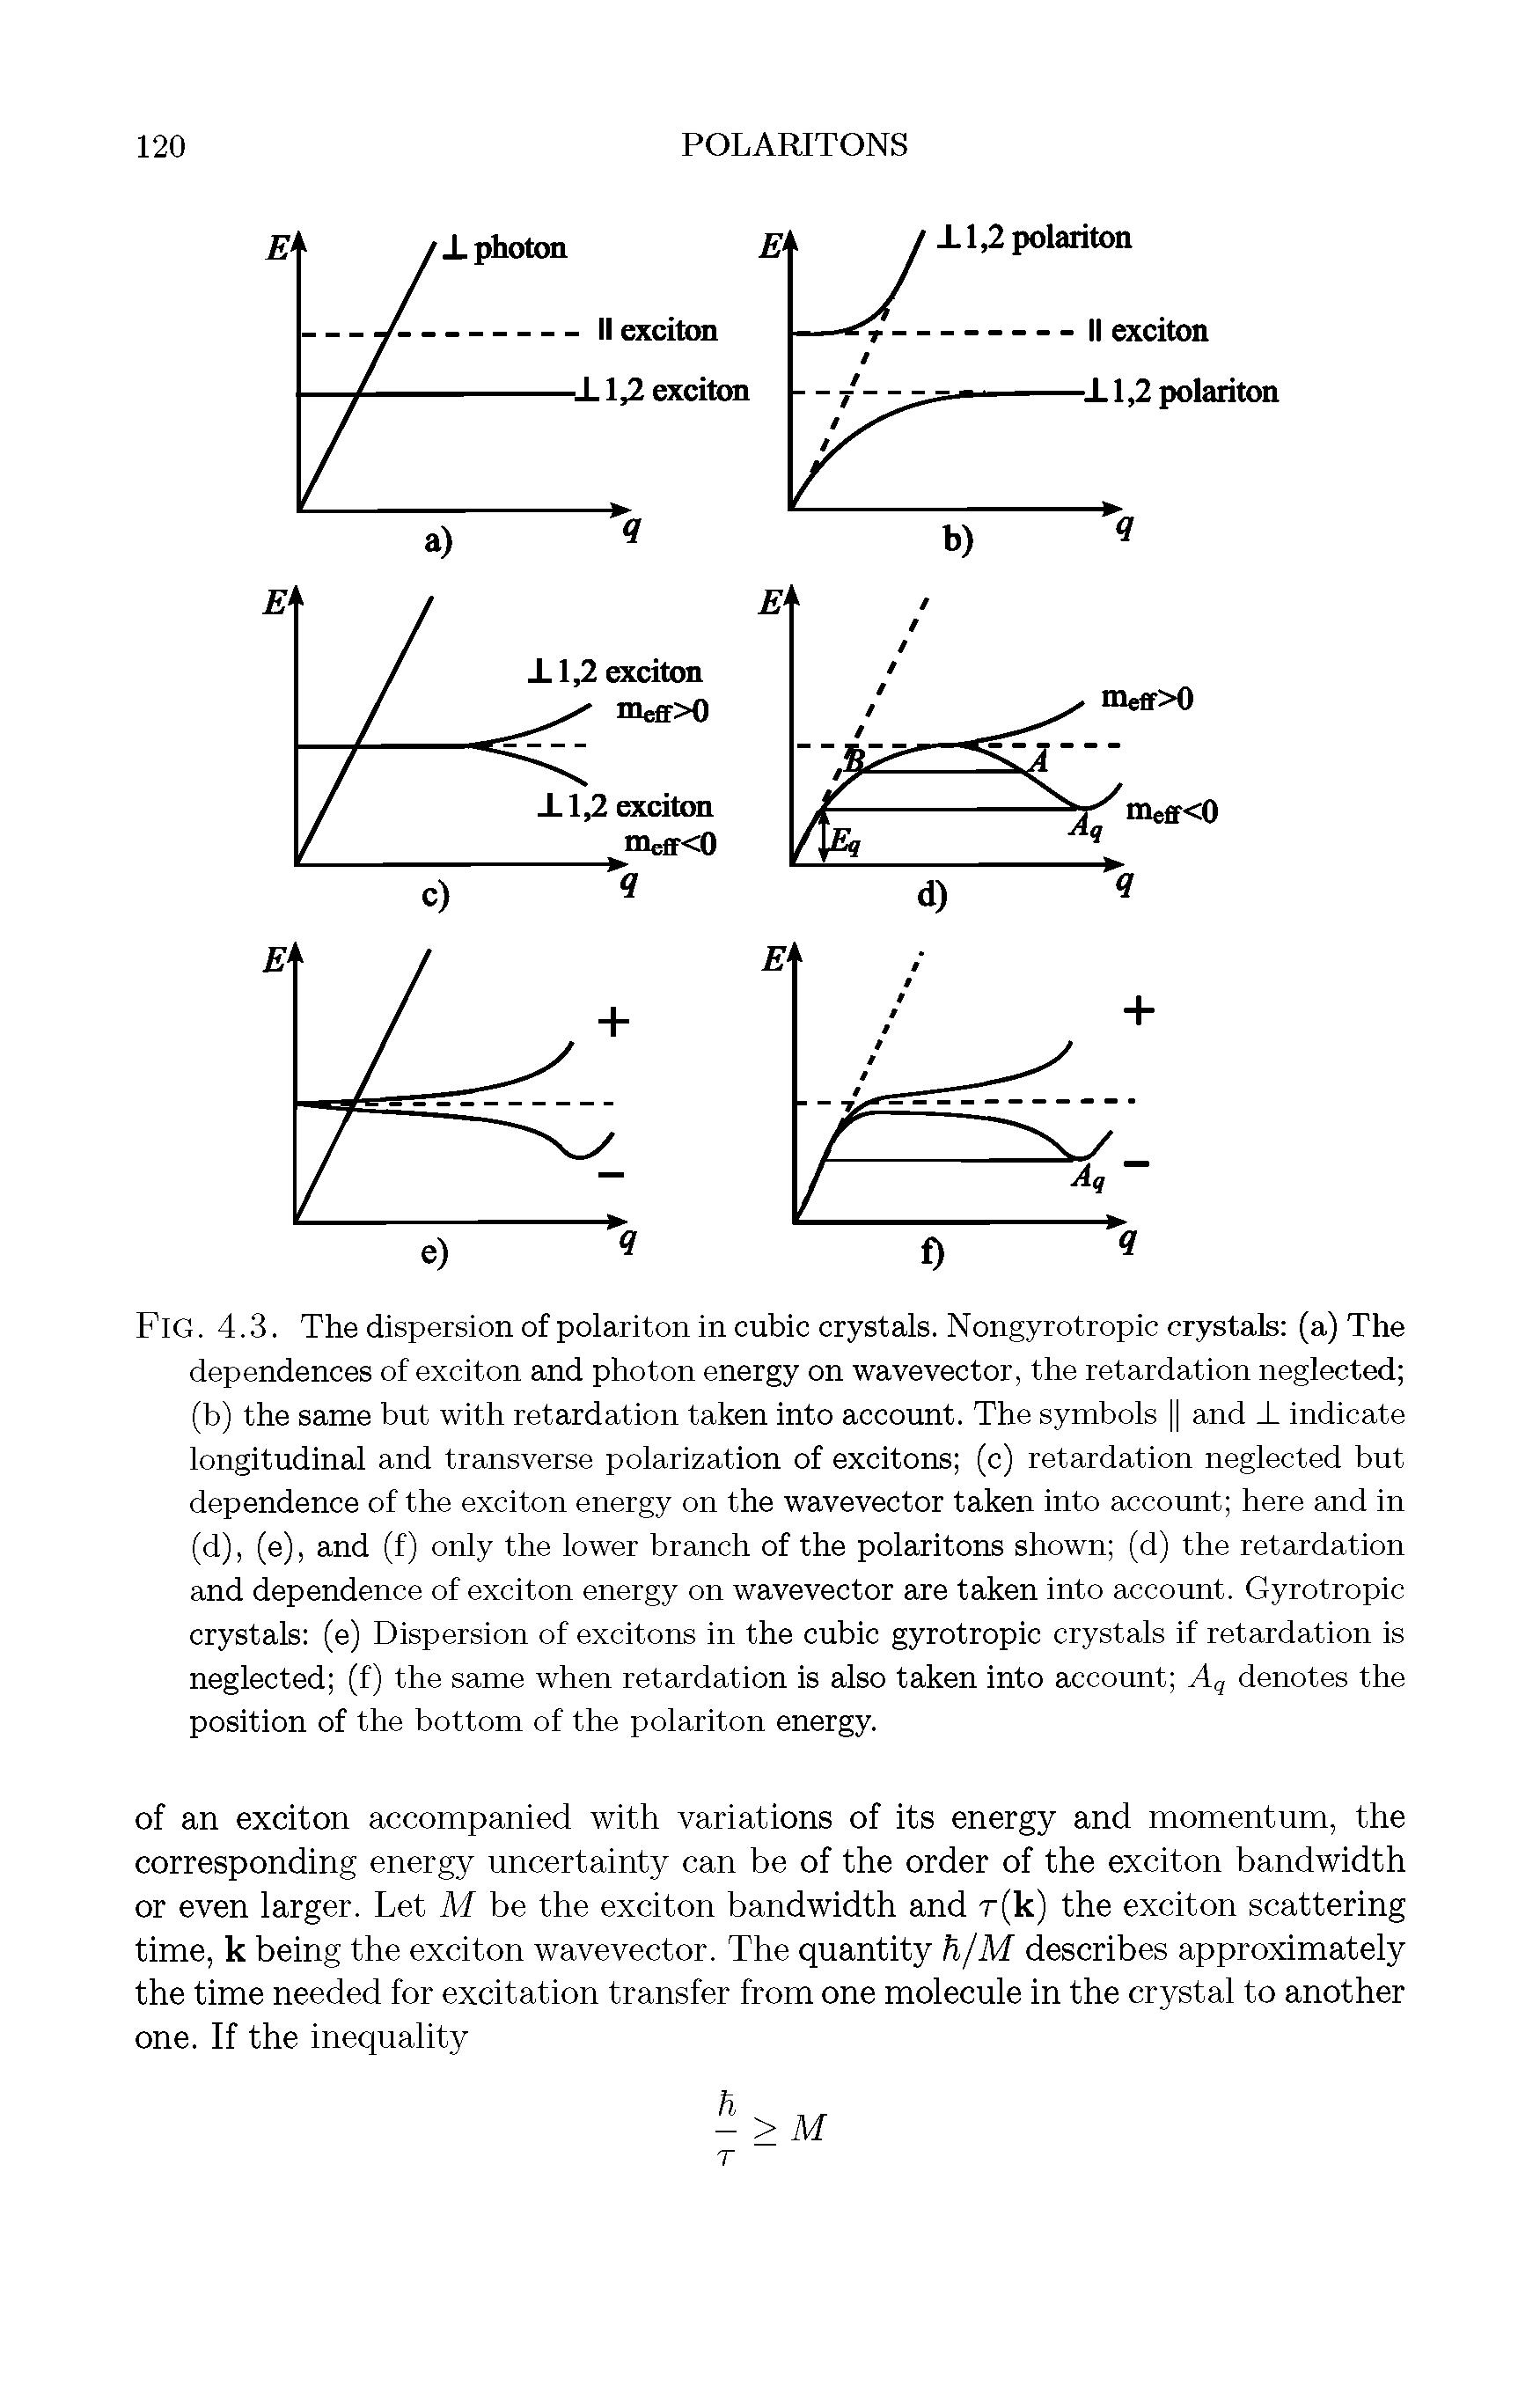 Fig. 4.3. The dispersion of polariton in cubic crystals. Nongyrotropic crystals (a) The dependences of exciton and photon energy on wavevector, the retardation neglected (b) the same but with retardation taken into account. The symbols and L indicate longitudinal and transverse polarization of excitons (c) retardation neglected but dependence of the exciton energy on the wavevector taken into account here and in (d), (e), and (f) only the lower branch of the polaritons shown (d) the retardation and dependence of exciton energy on wavevector are taken into account. Gyrotropic crystals (e) Dispersion of excitons in the cubic gyrotropic crystals if retardation is neglected (f) the same when retardation is also taken into account Aq denotes the position of the bottom of the polariton energy.